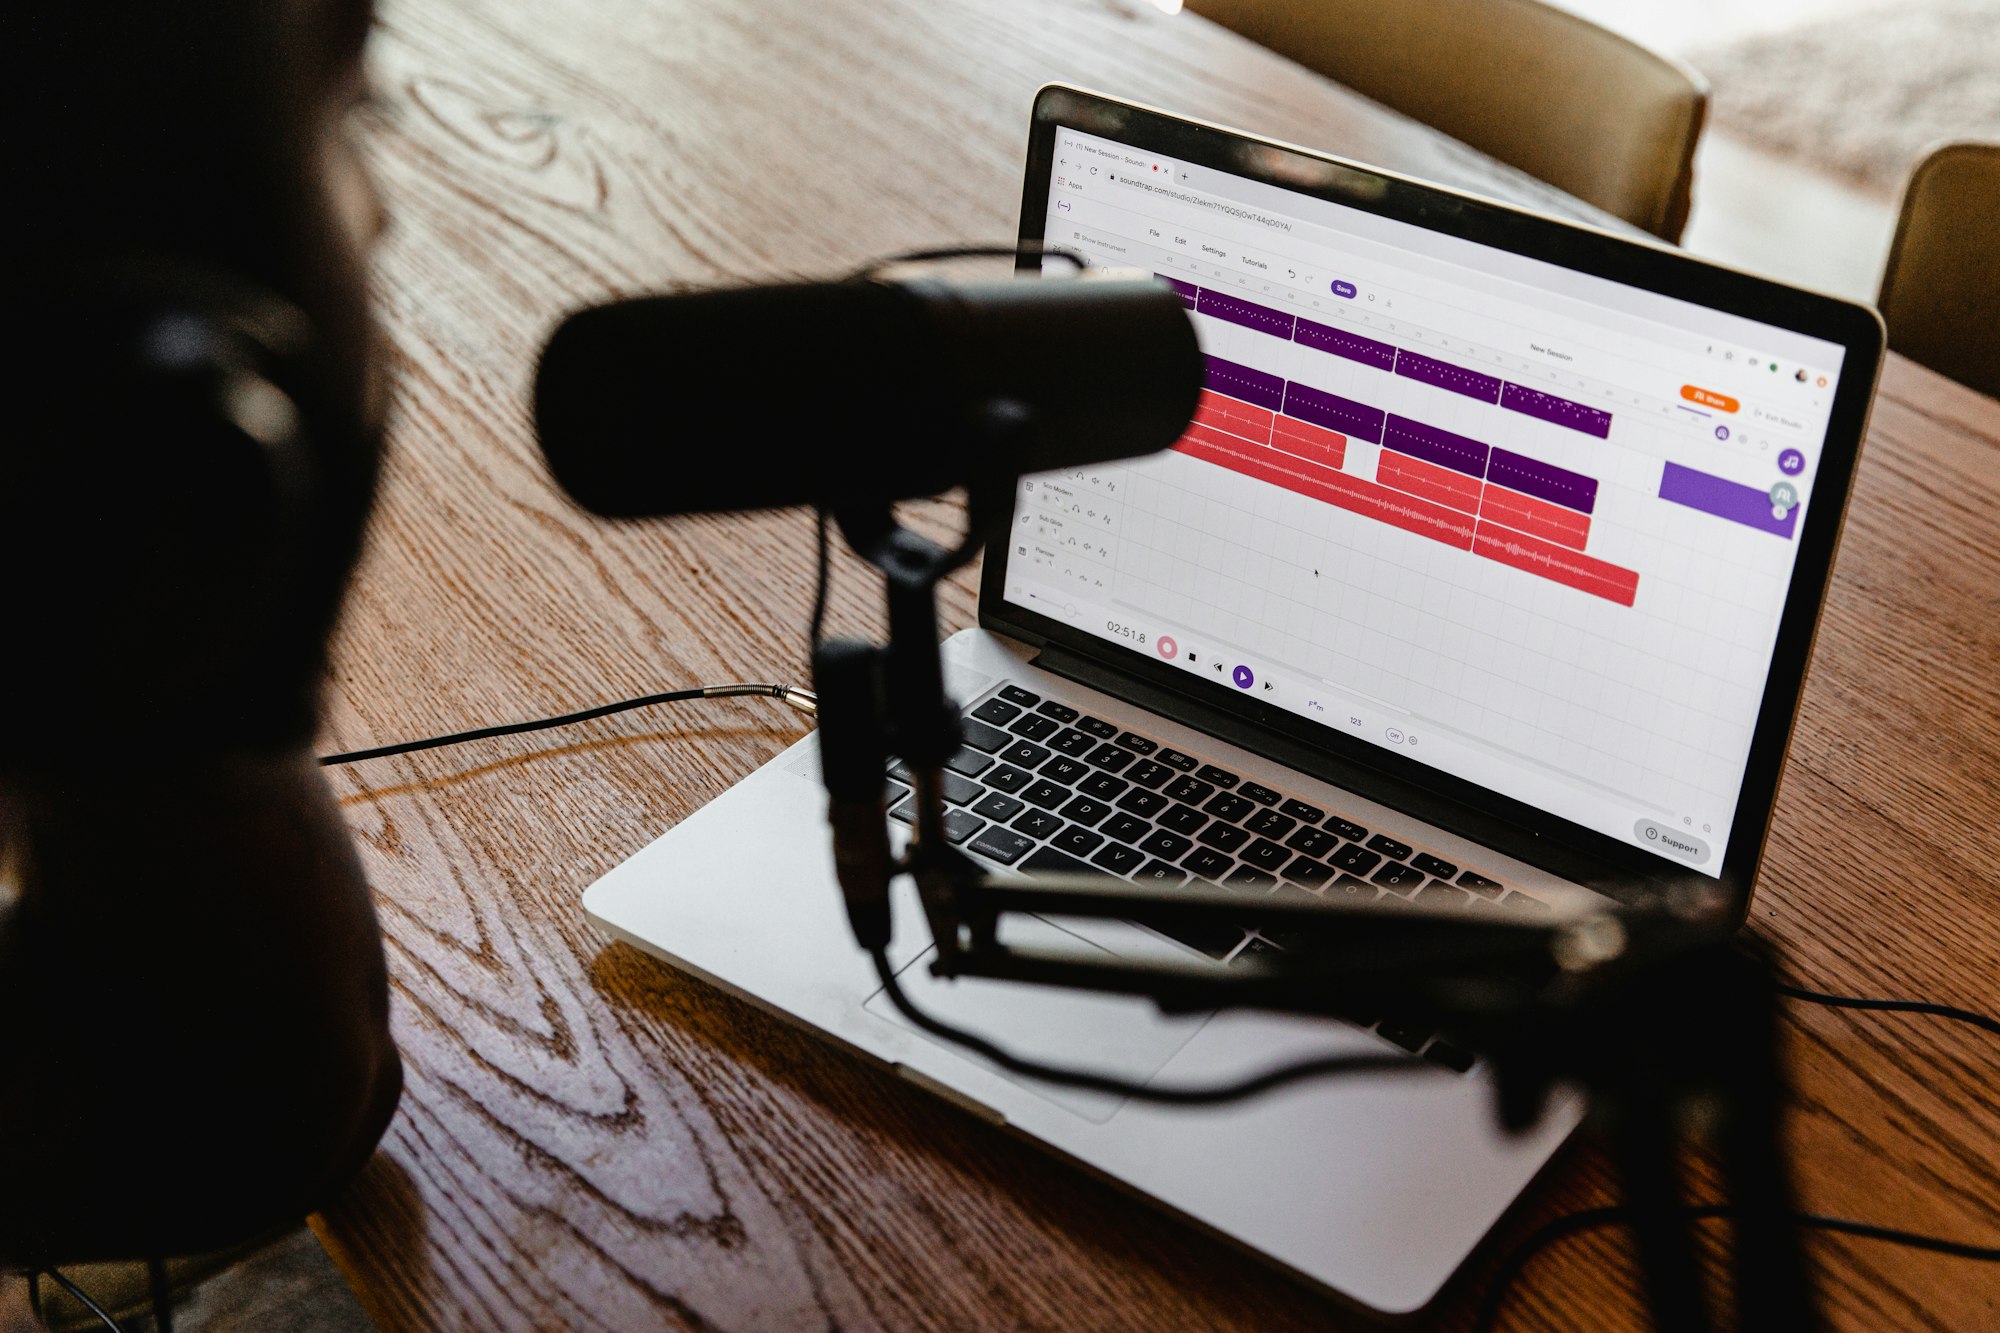 Podcast being recorded on a laptop screen